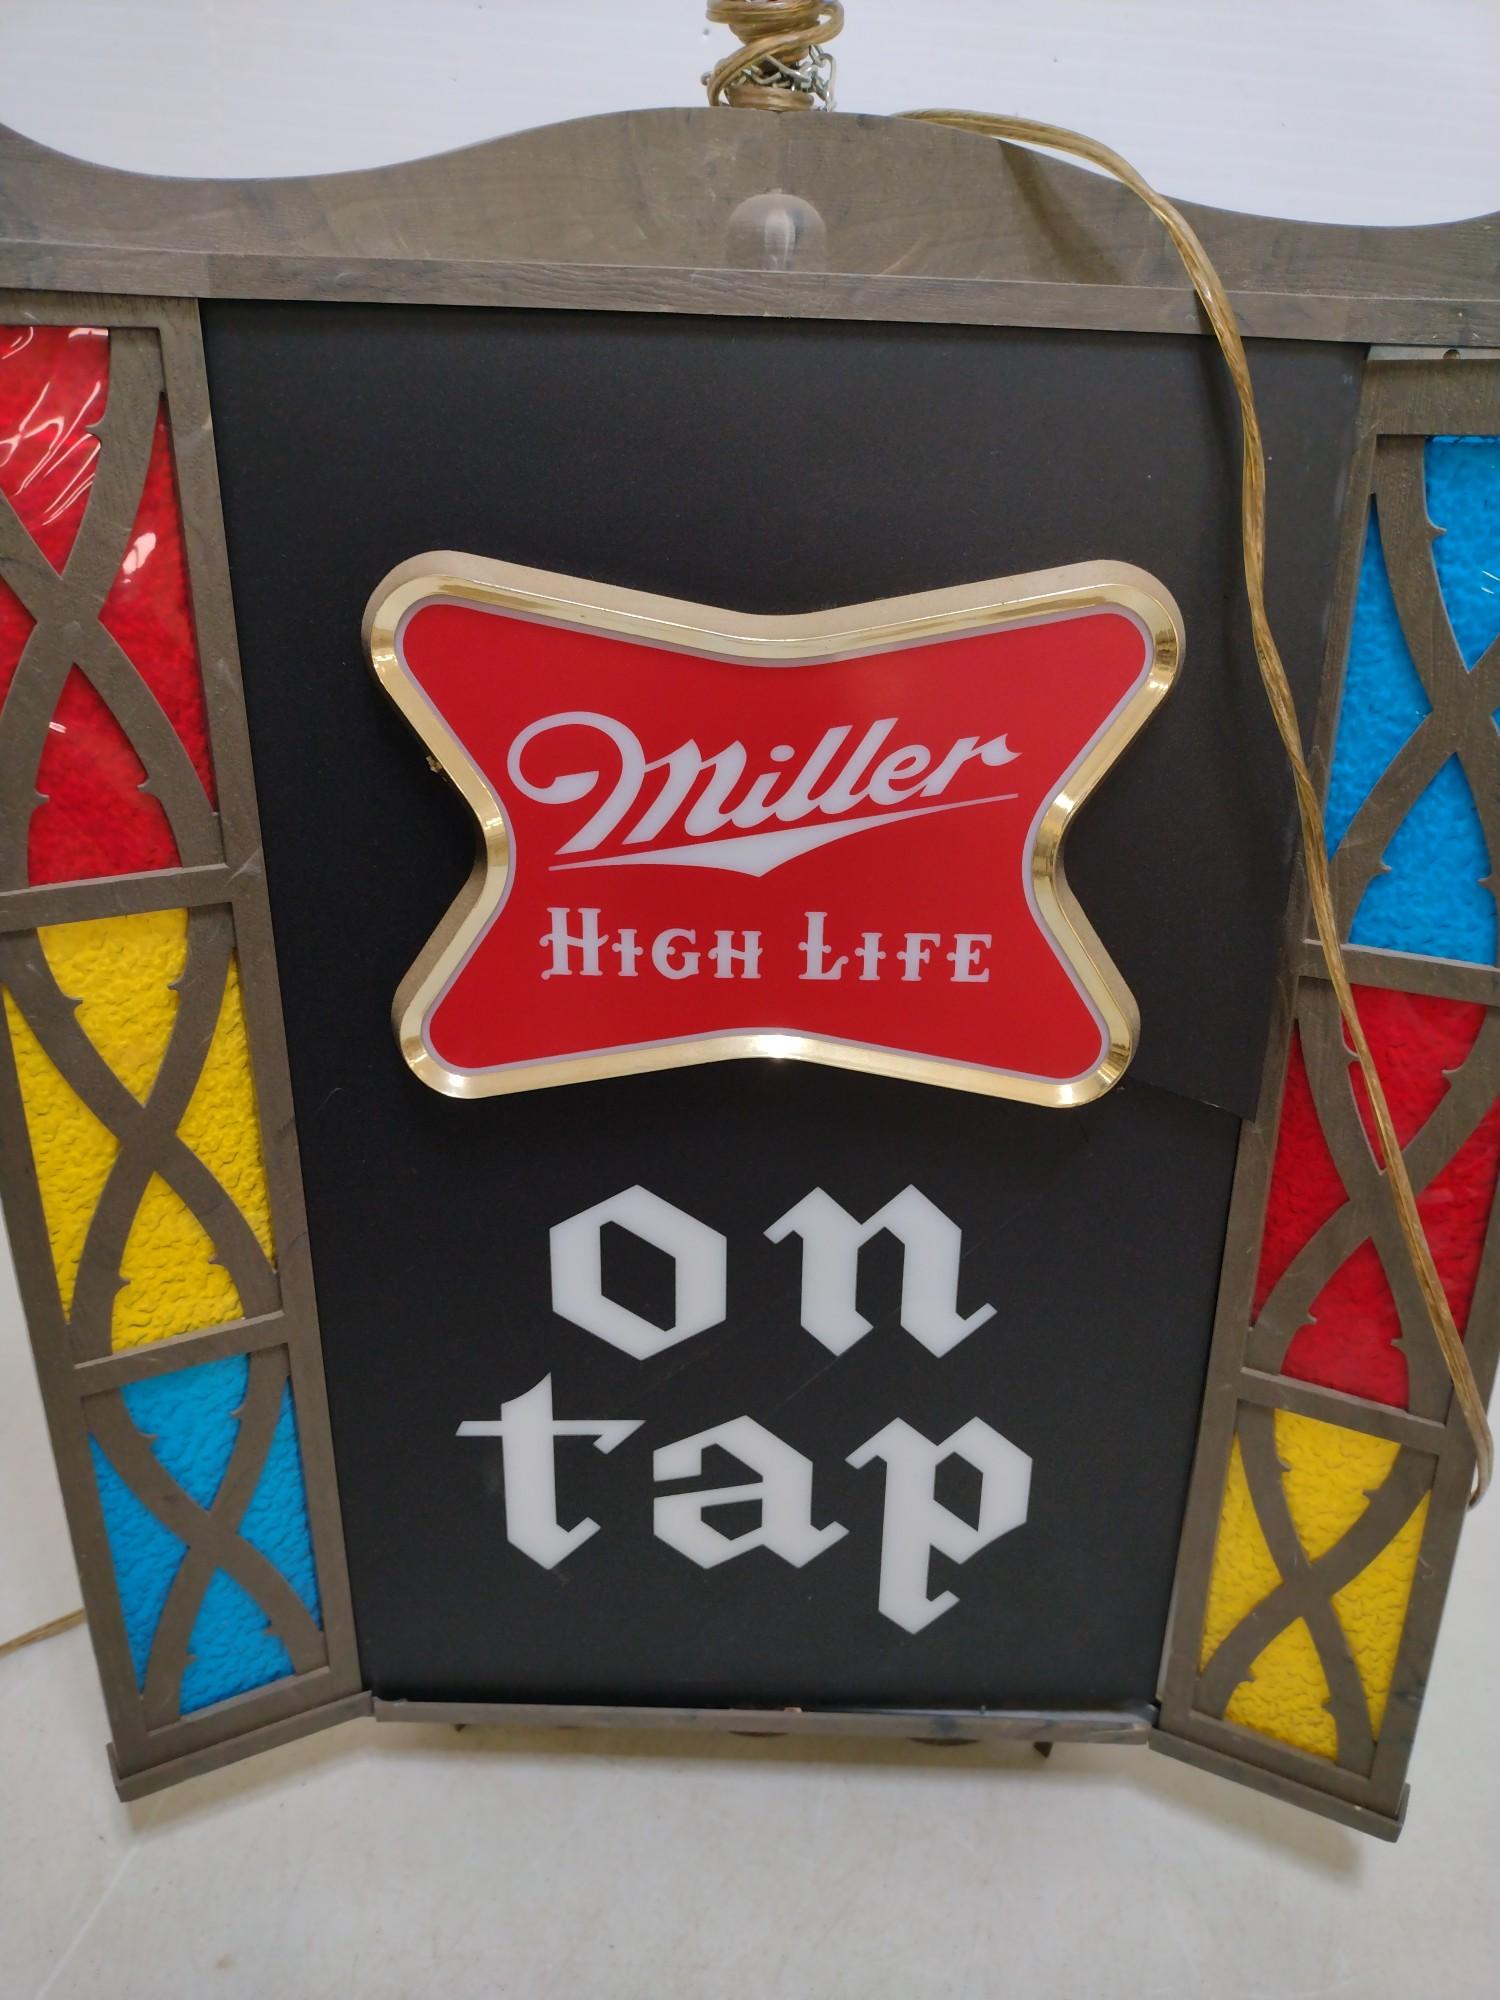 Three-Sided Miller High Life Lighted Hanging Clock